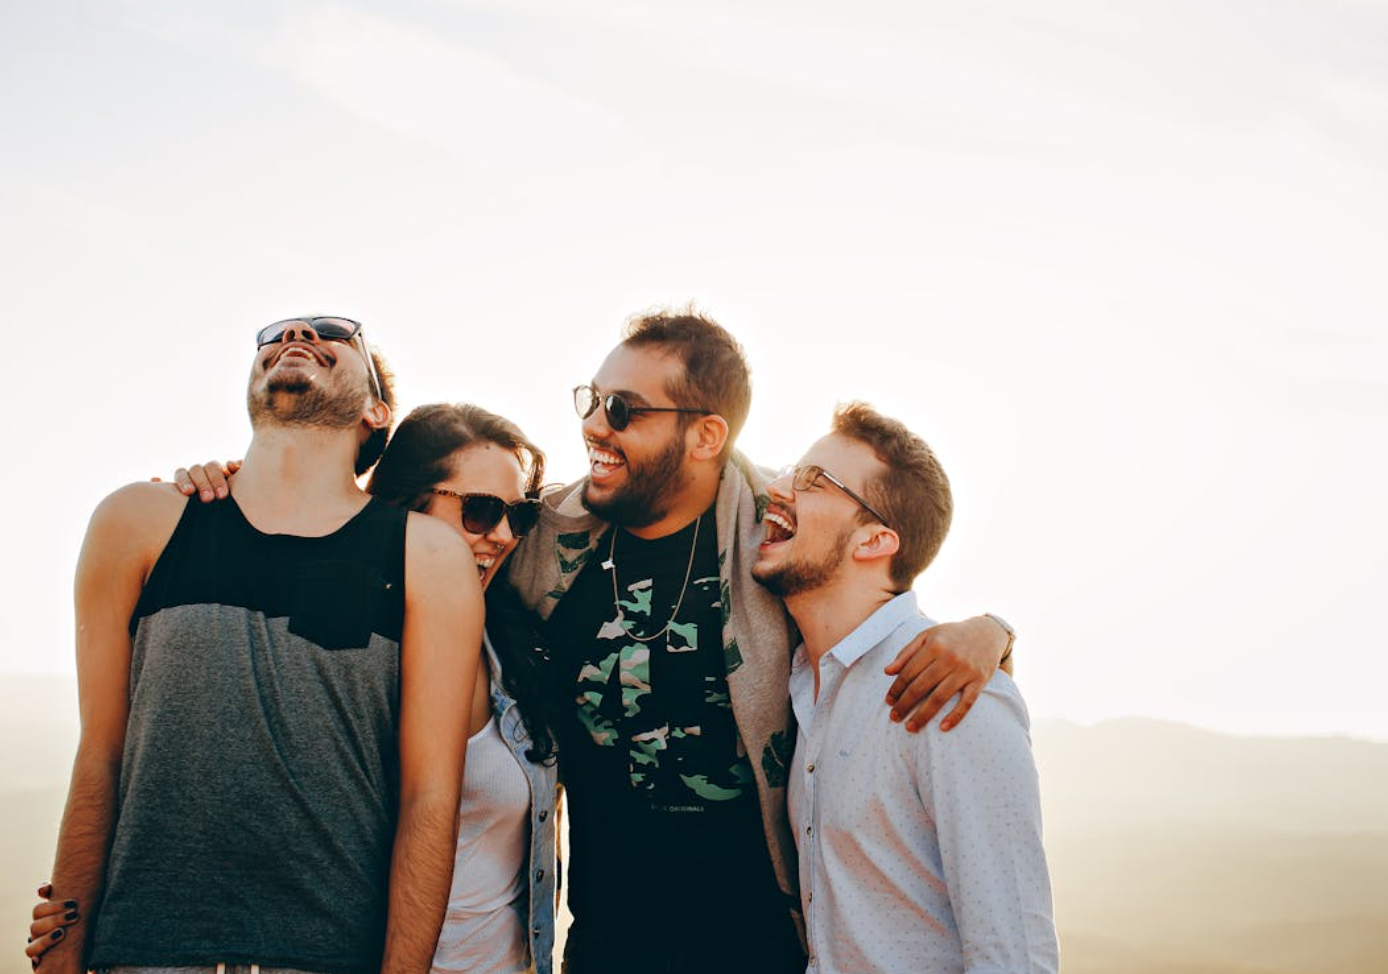 Four friends laughing and hugging; image by Helena Lopes, via Pexels.com.